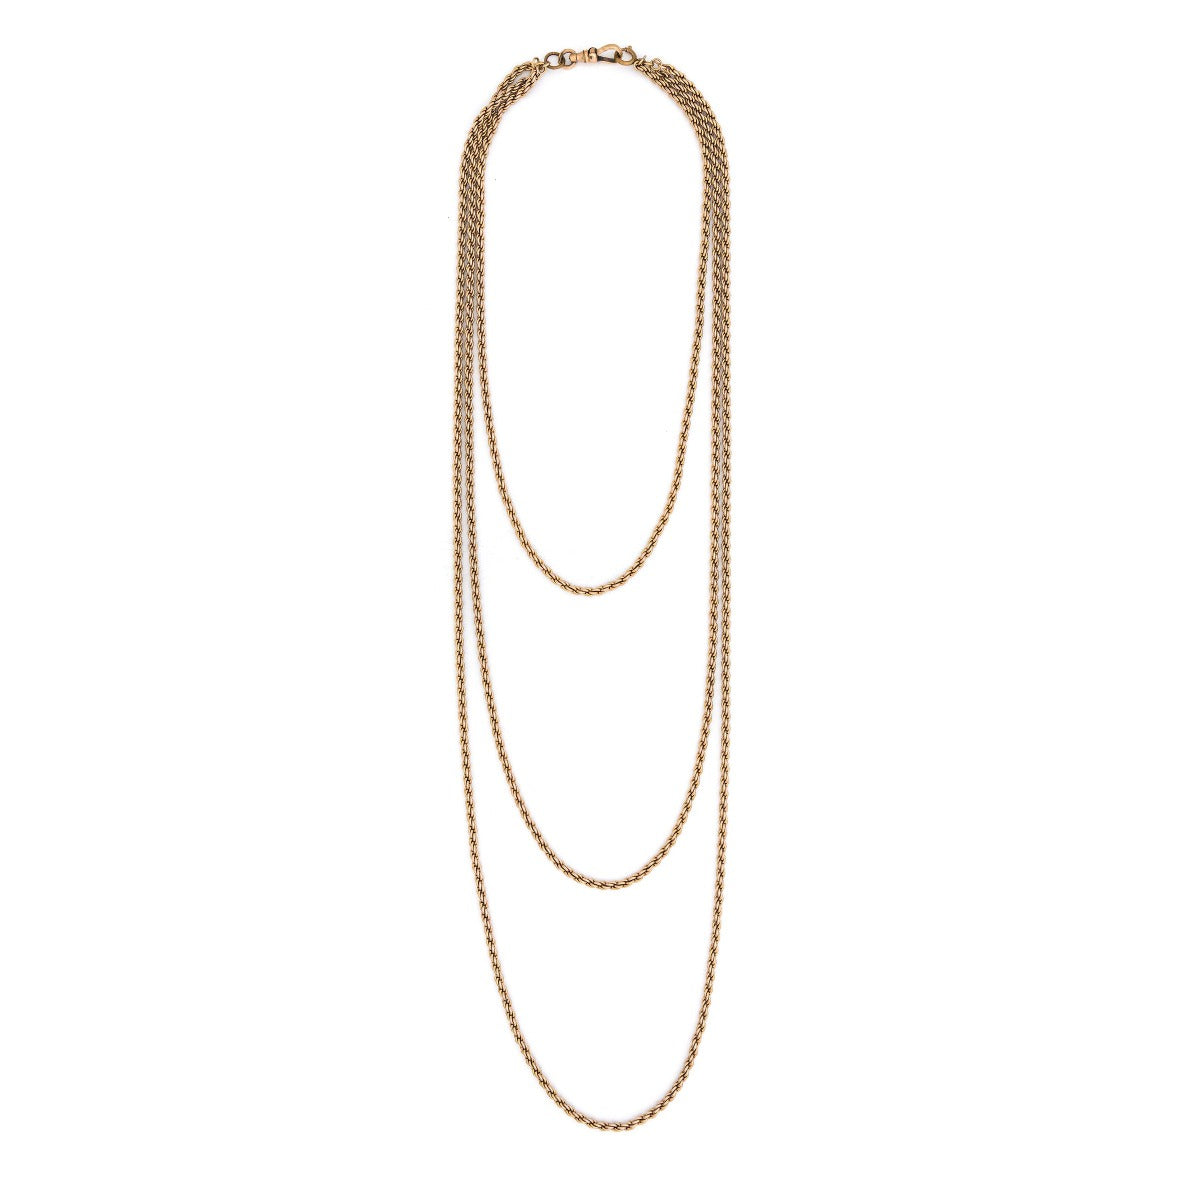 This 12K gold fill antique rope chain features three gorgeous strands of varying lengths (18", 27" and 34")  which meet together at the back with a hefty watch chain hook. Wear this striking piece alone or layered with your favorite pieces for a bold statement. Close up view, showing clasp